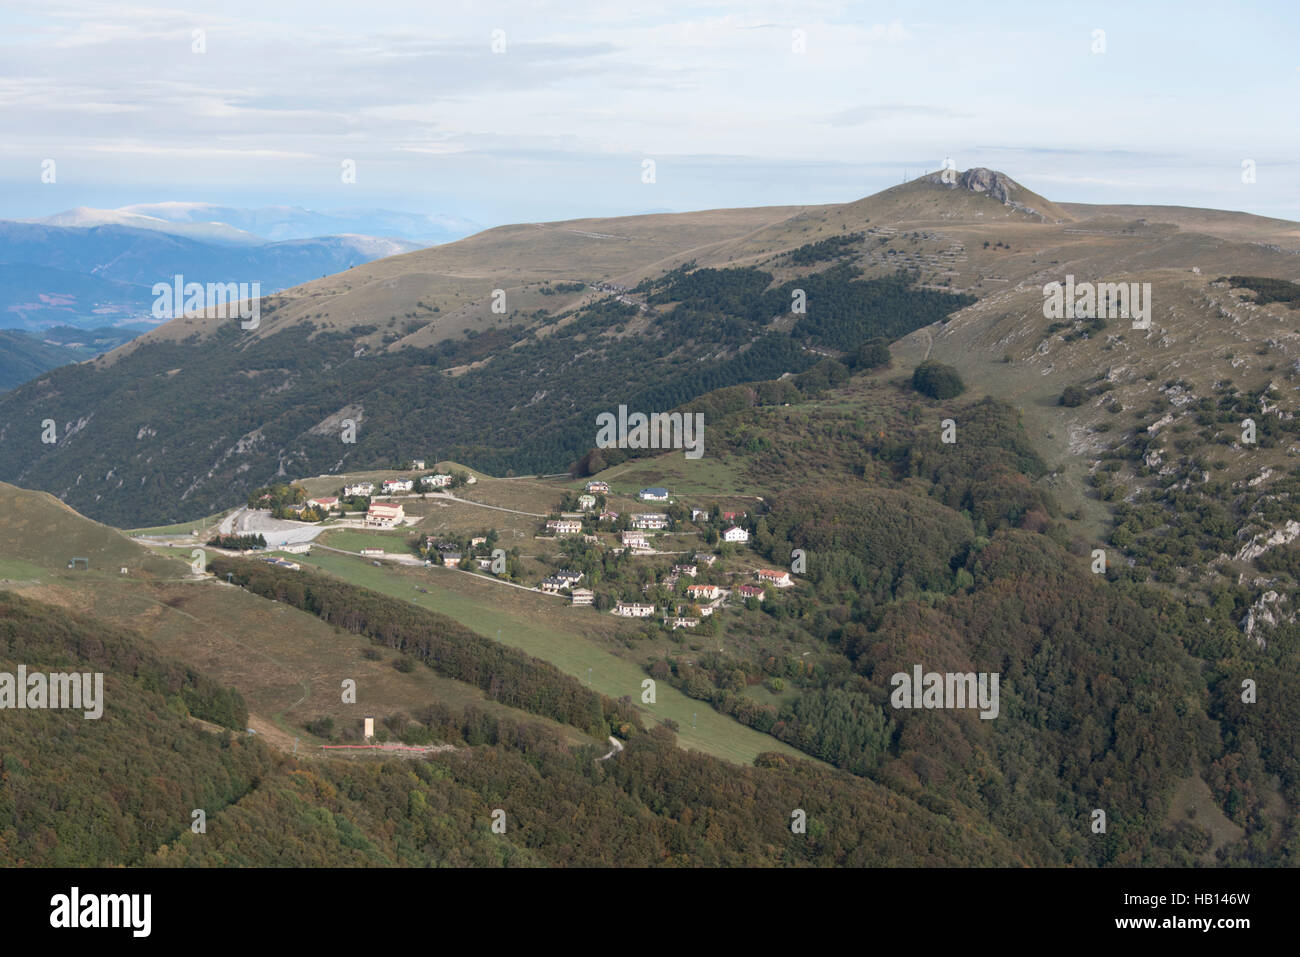 View of Pintura a small skiing village high in the Sibillini Mountains. Stock Photo